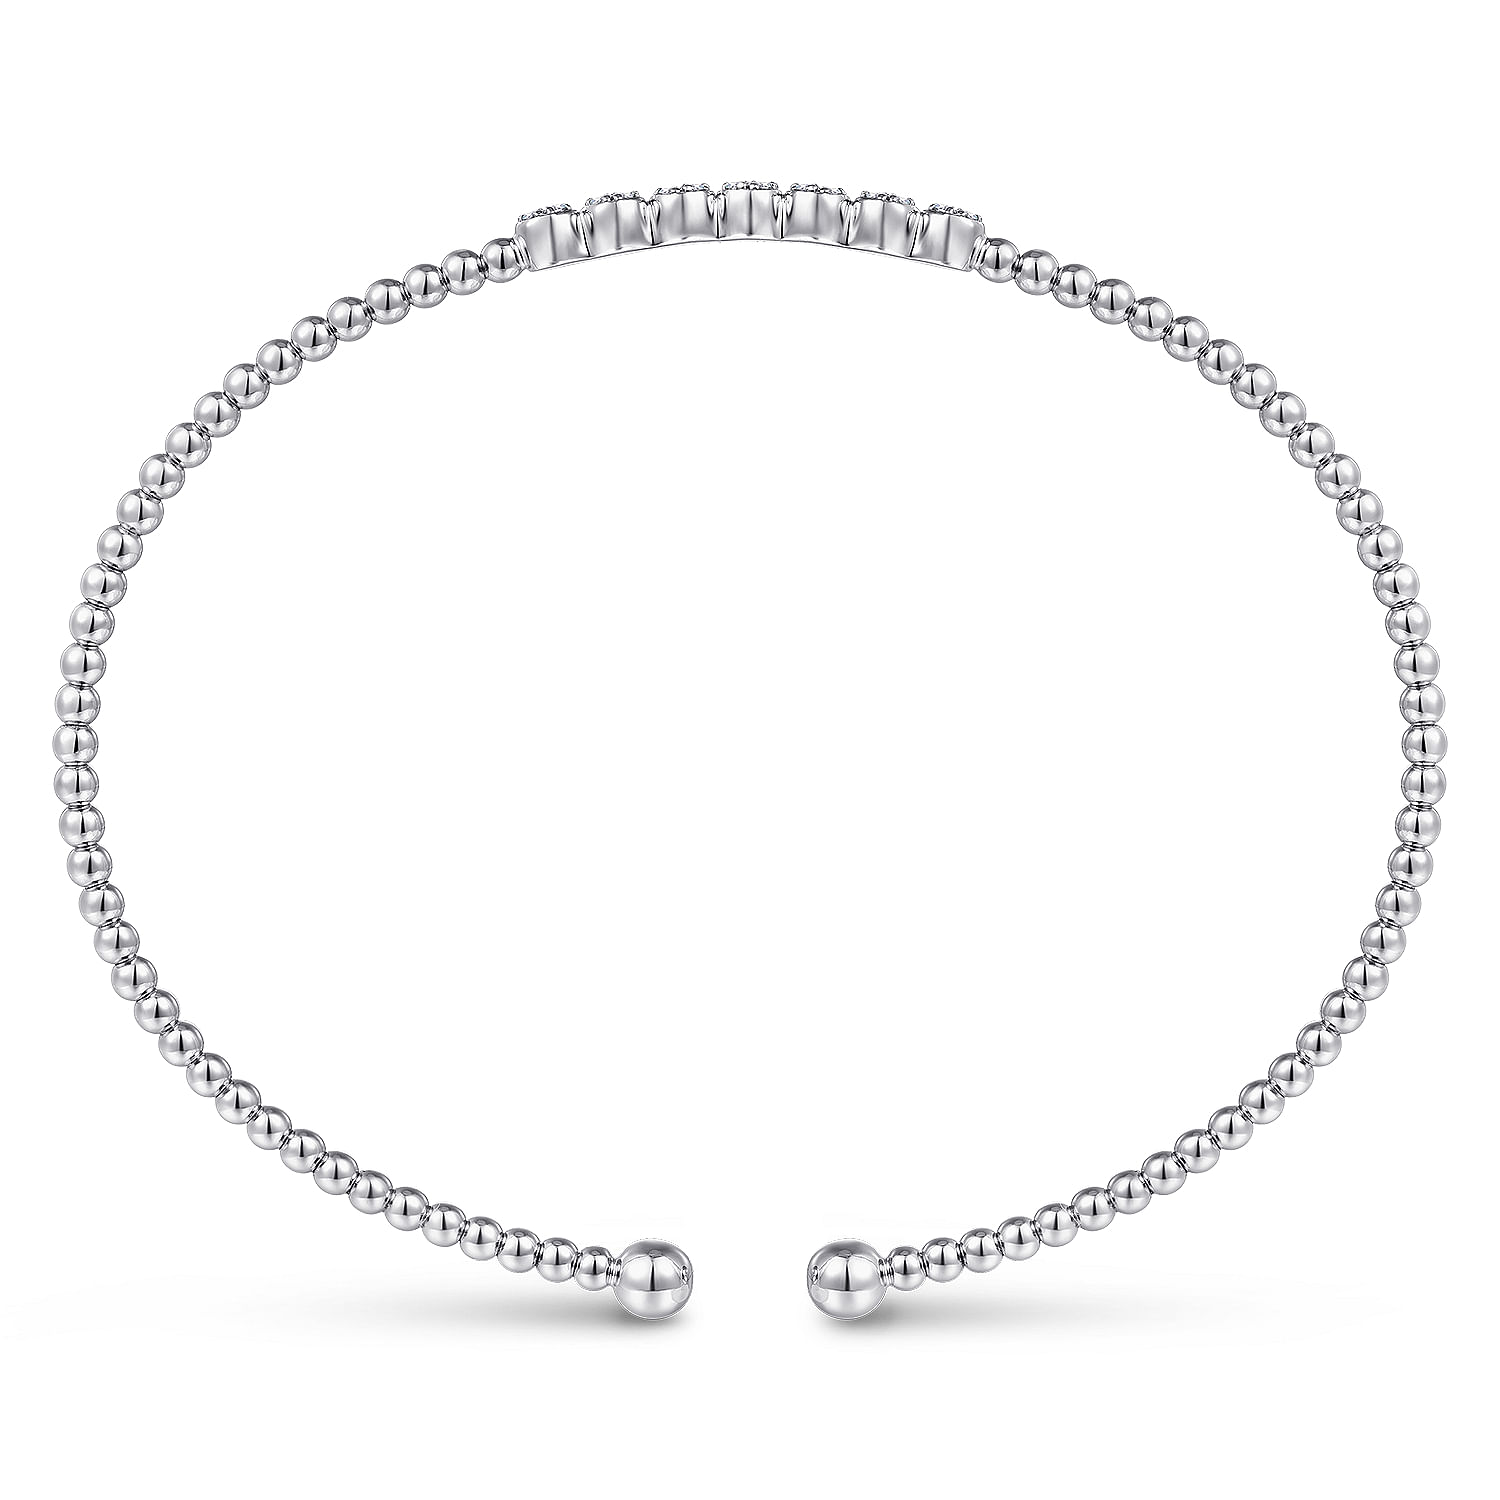 14K White Gold Bujukan Bead Cuff Bracelet with Cluster Diamond Stations